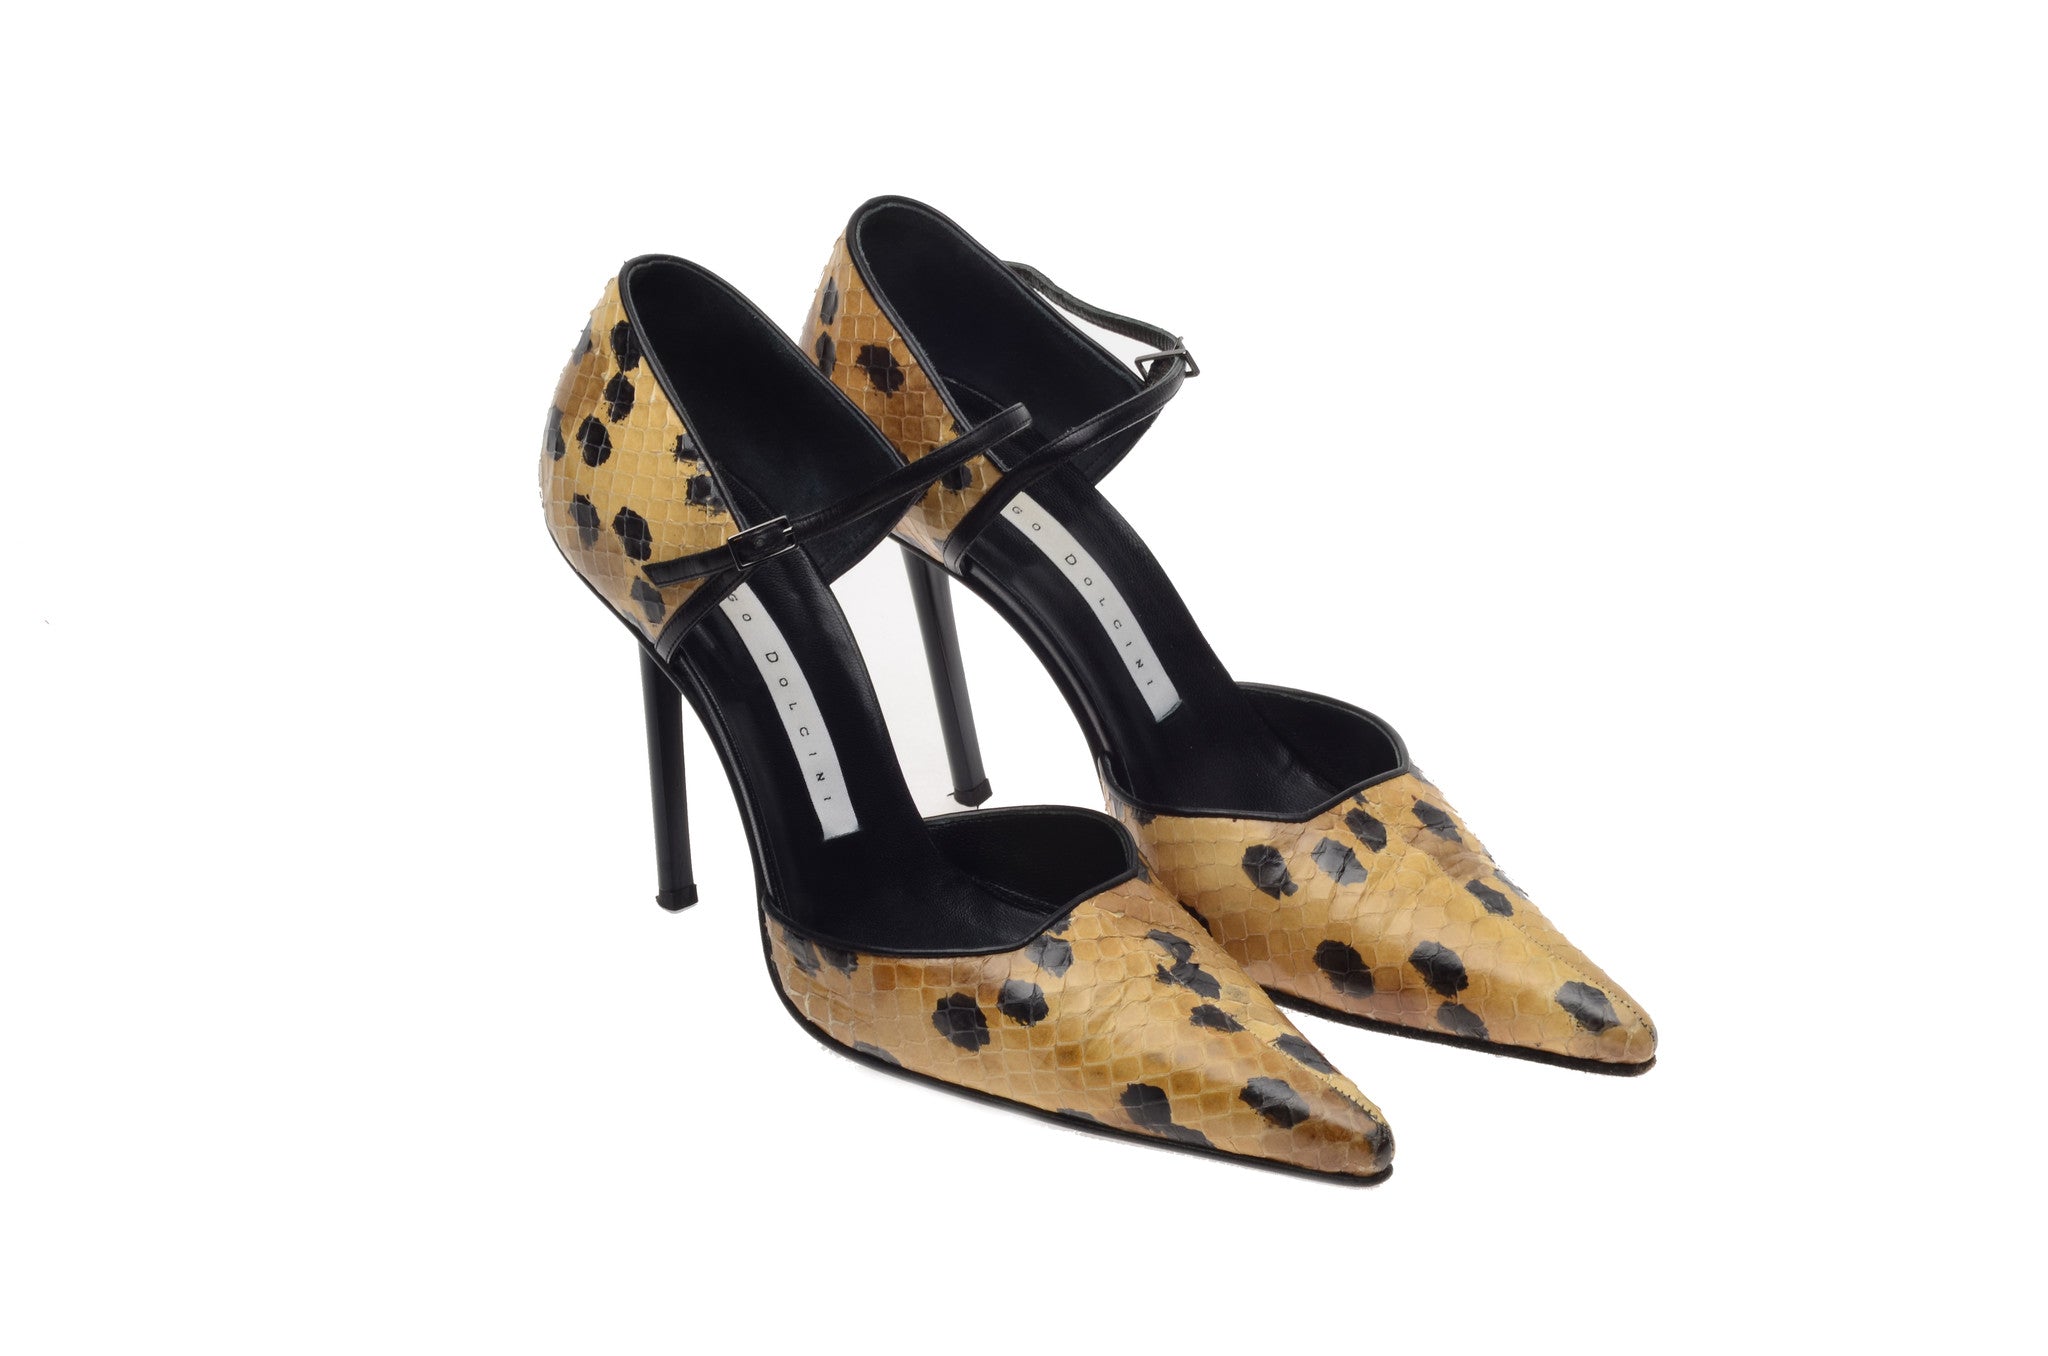 leopard pointed toe pumps